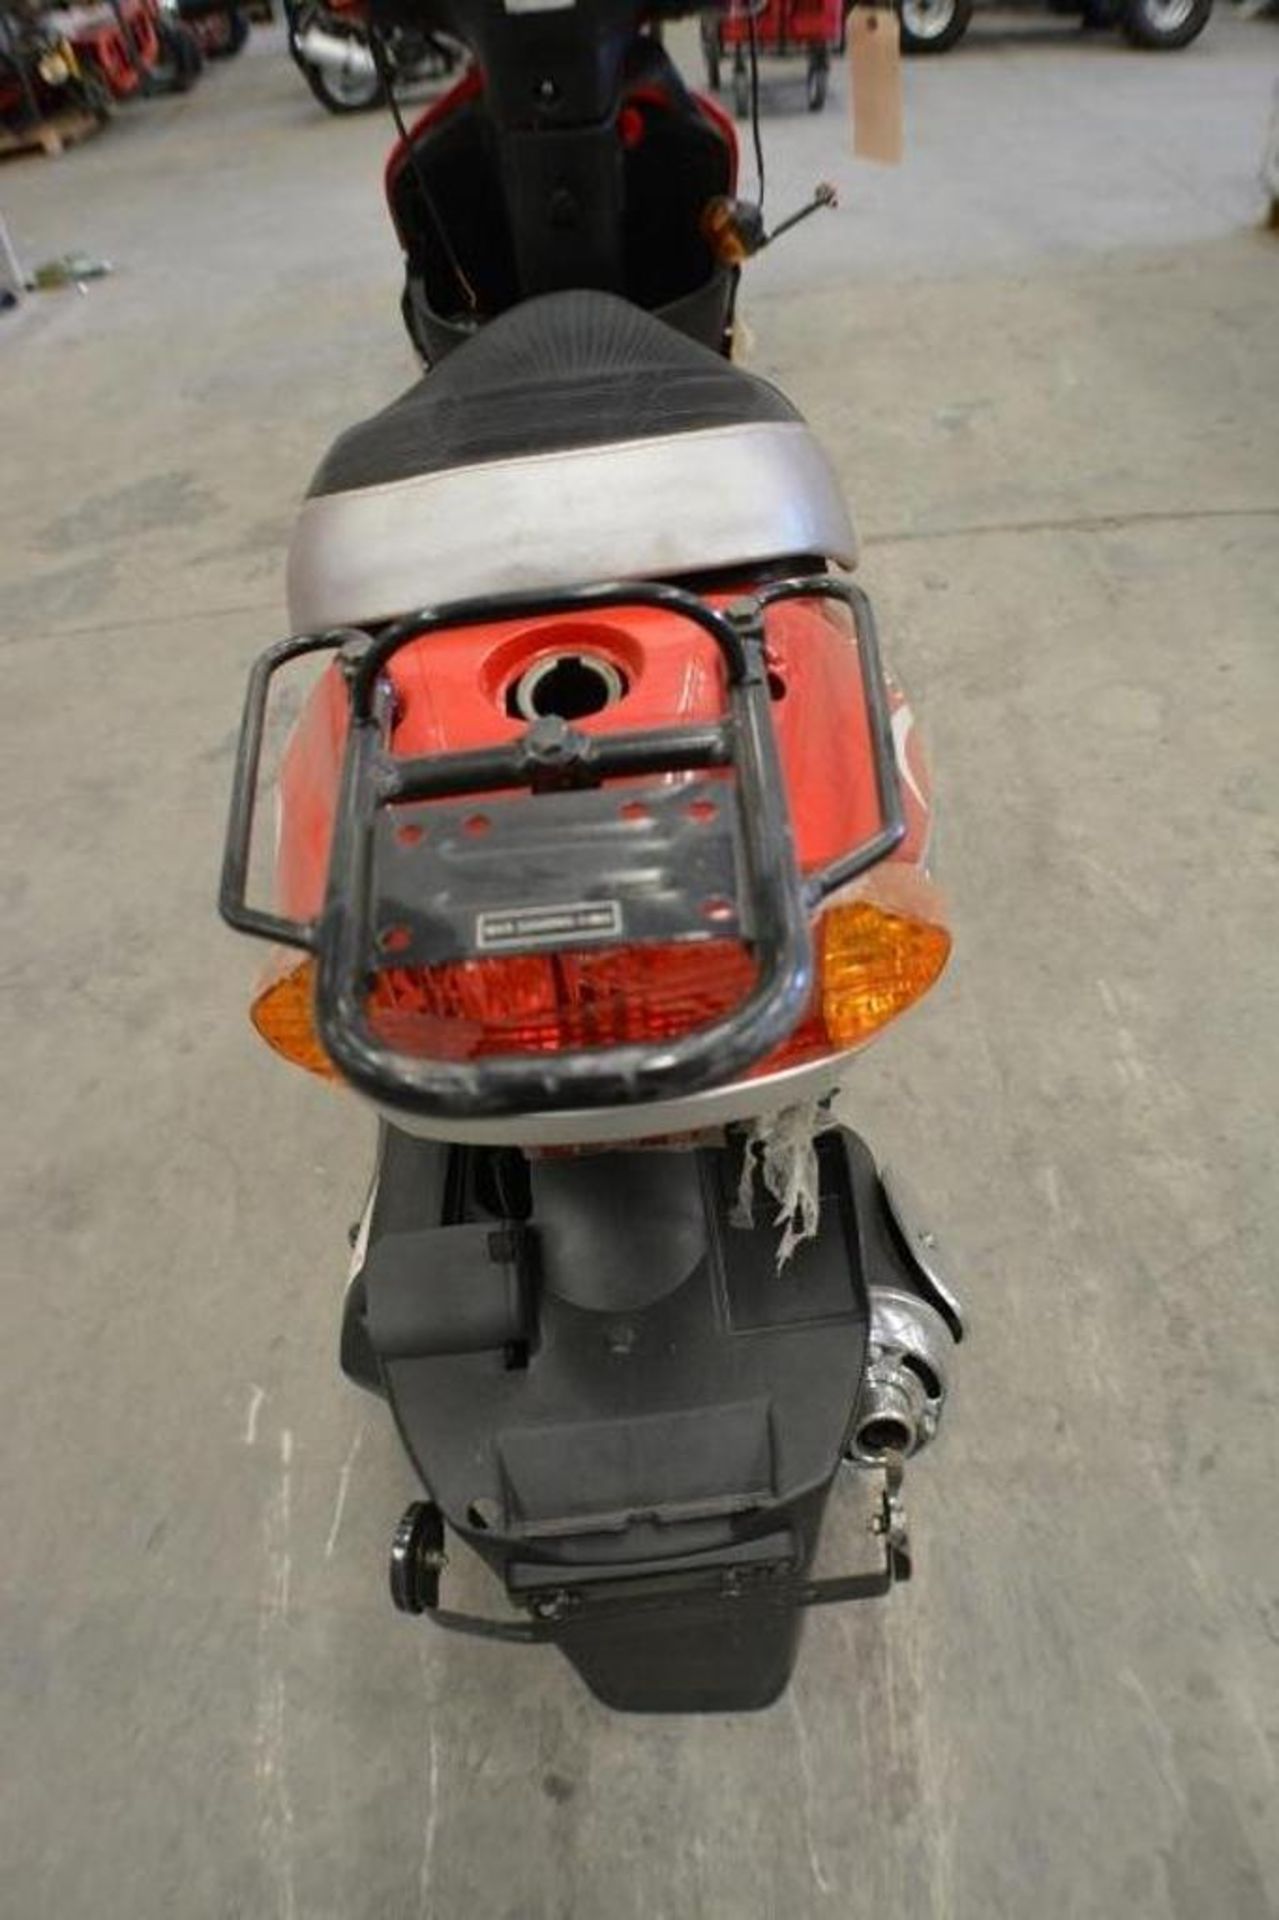 Electric Scooter 50cc Red/Black Color. This unit is for EXPORT ONLY. Buyers acknowledges is for expo - Image 5 of 7